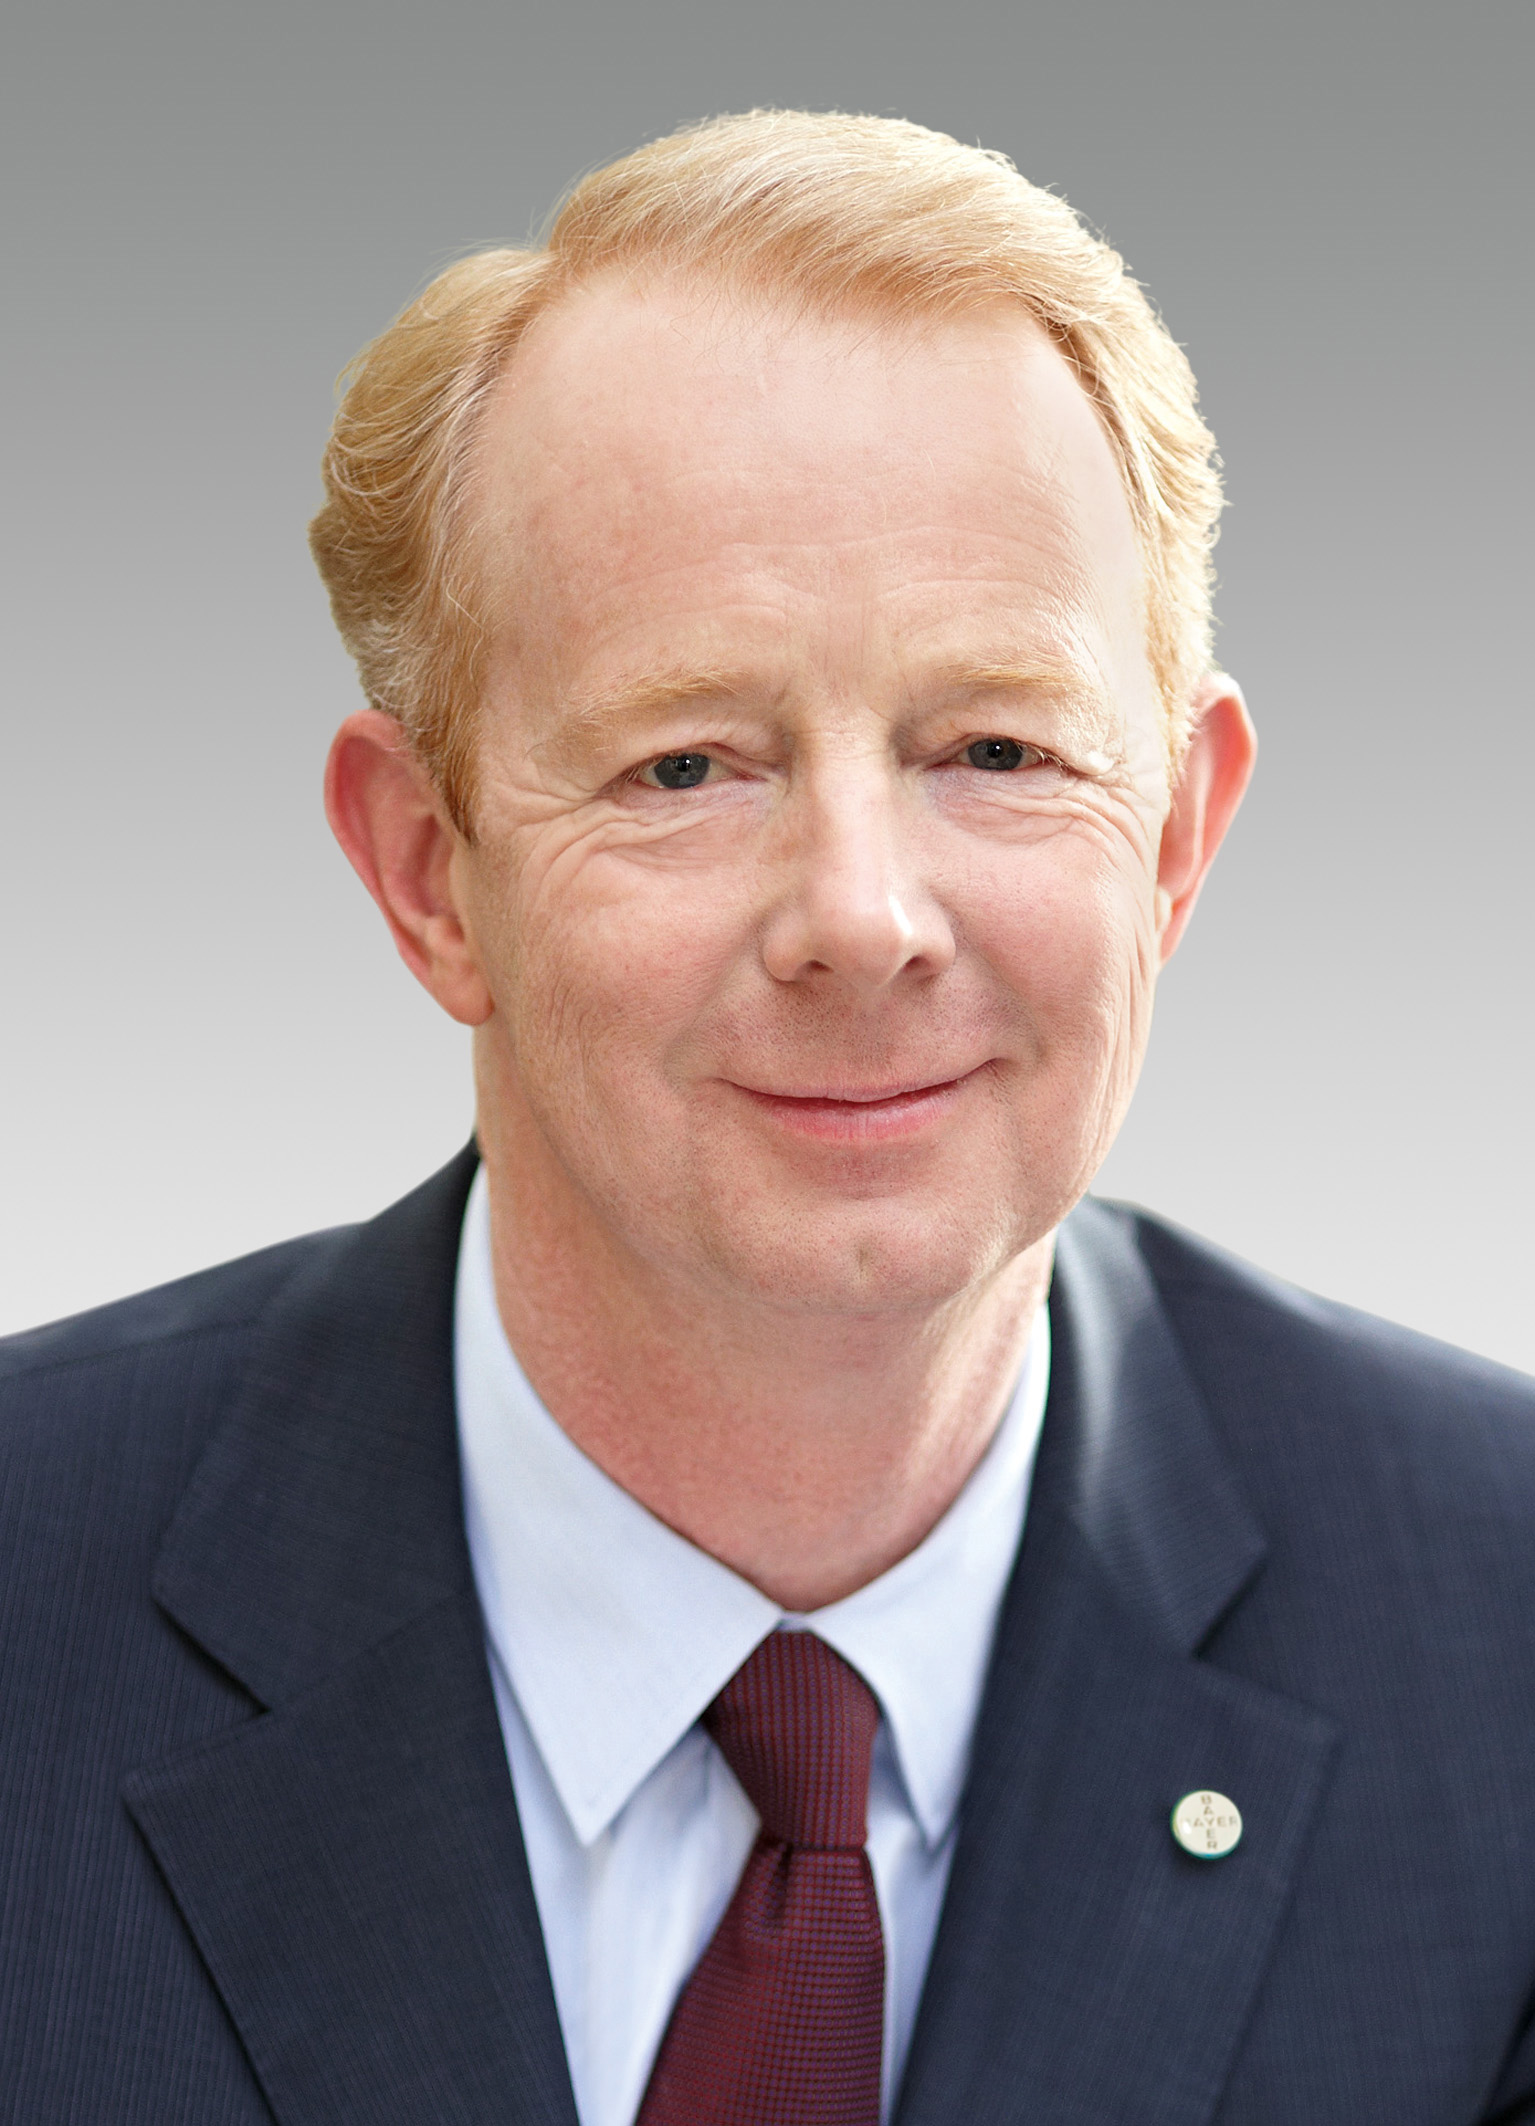 Dr. Marijn Dekkers has been chairman of Bayer AG’s Group Board of Management since October 1, 2010. (Image: Bayer AG)